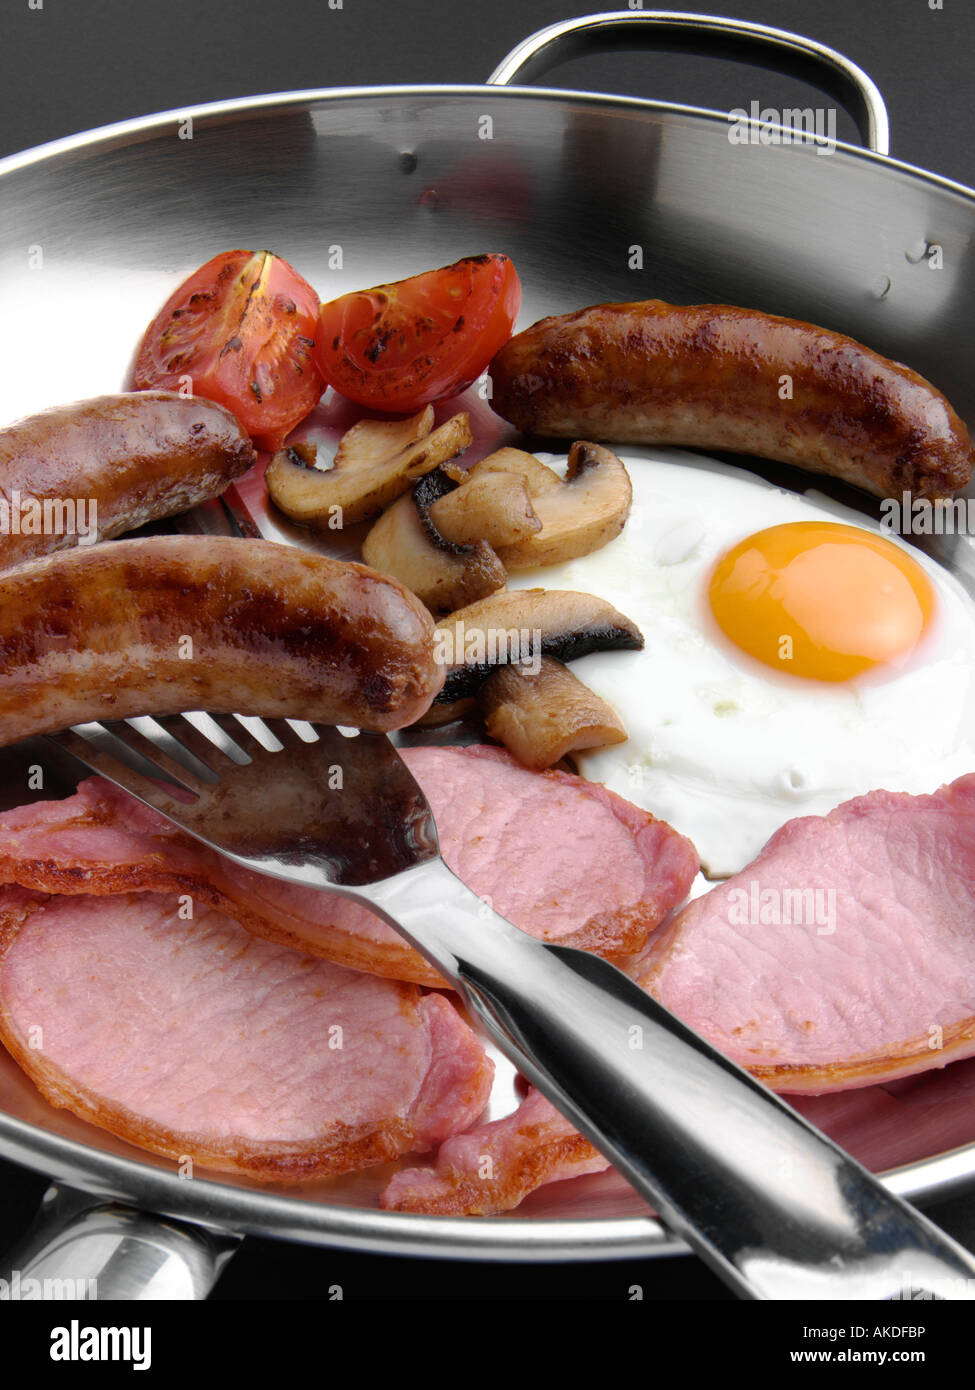 A full English cooked breakfast in a frying pan editorial food Stock Photo